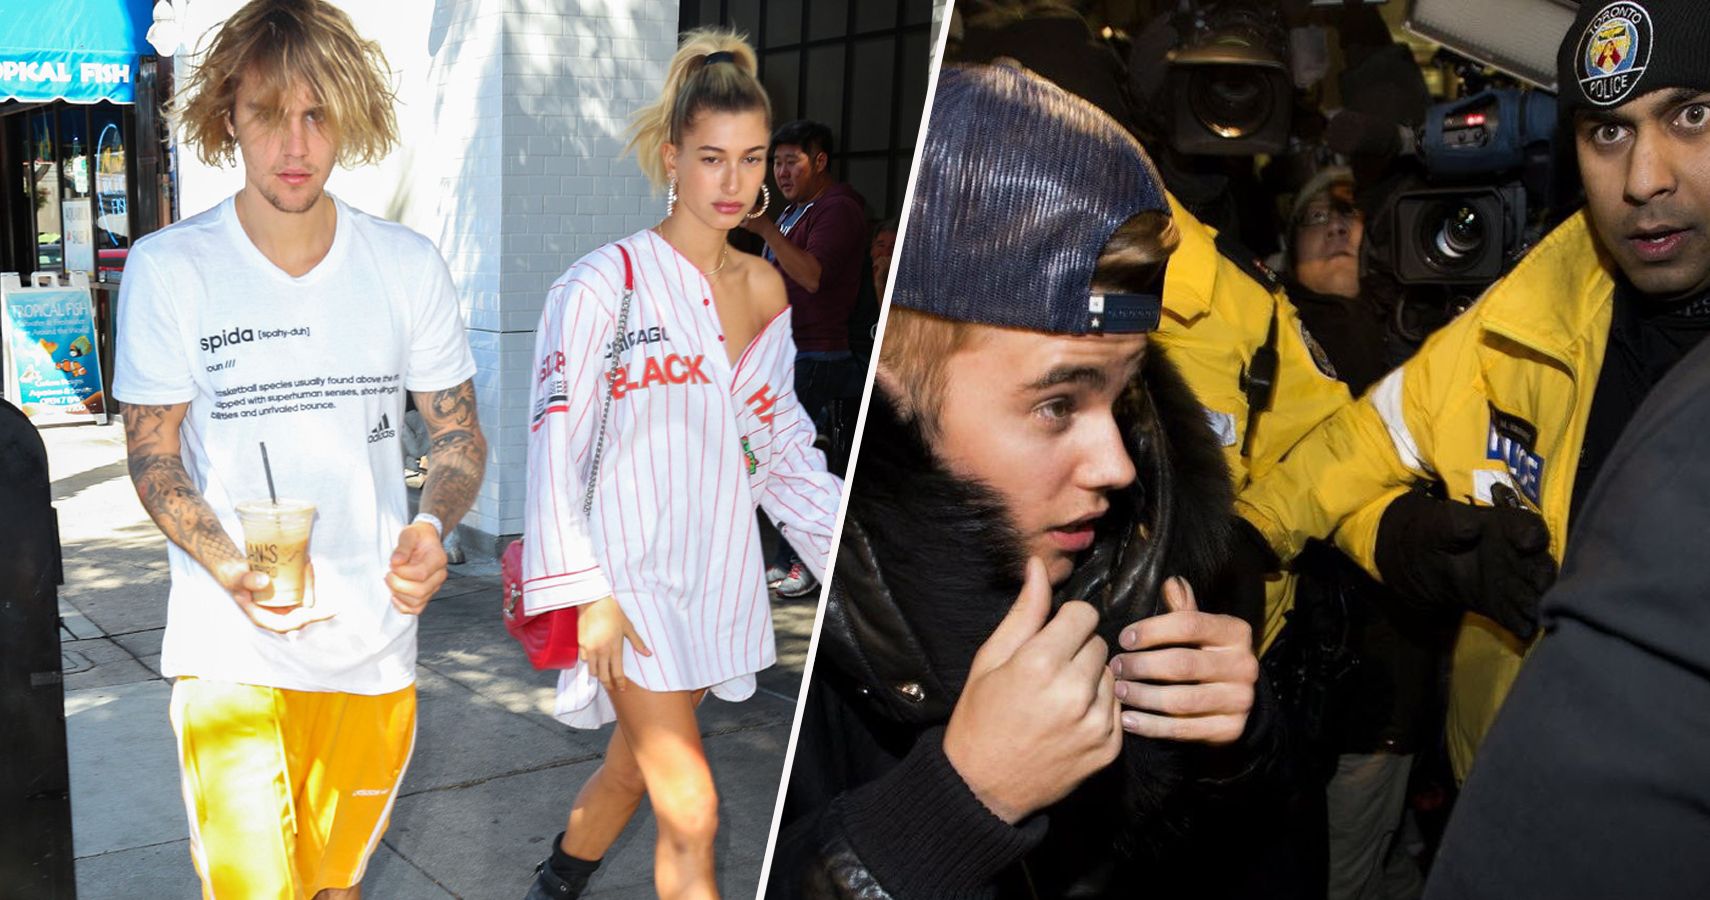 Justin Bieber gets hit, bounces back in celeb hockey game